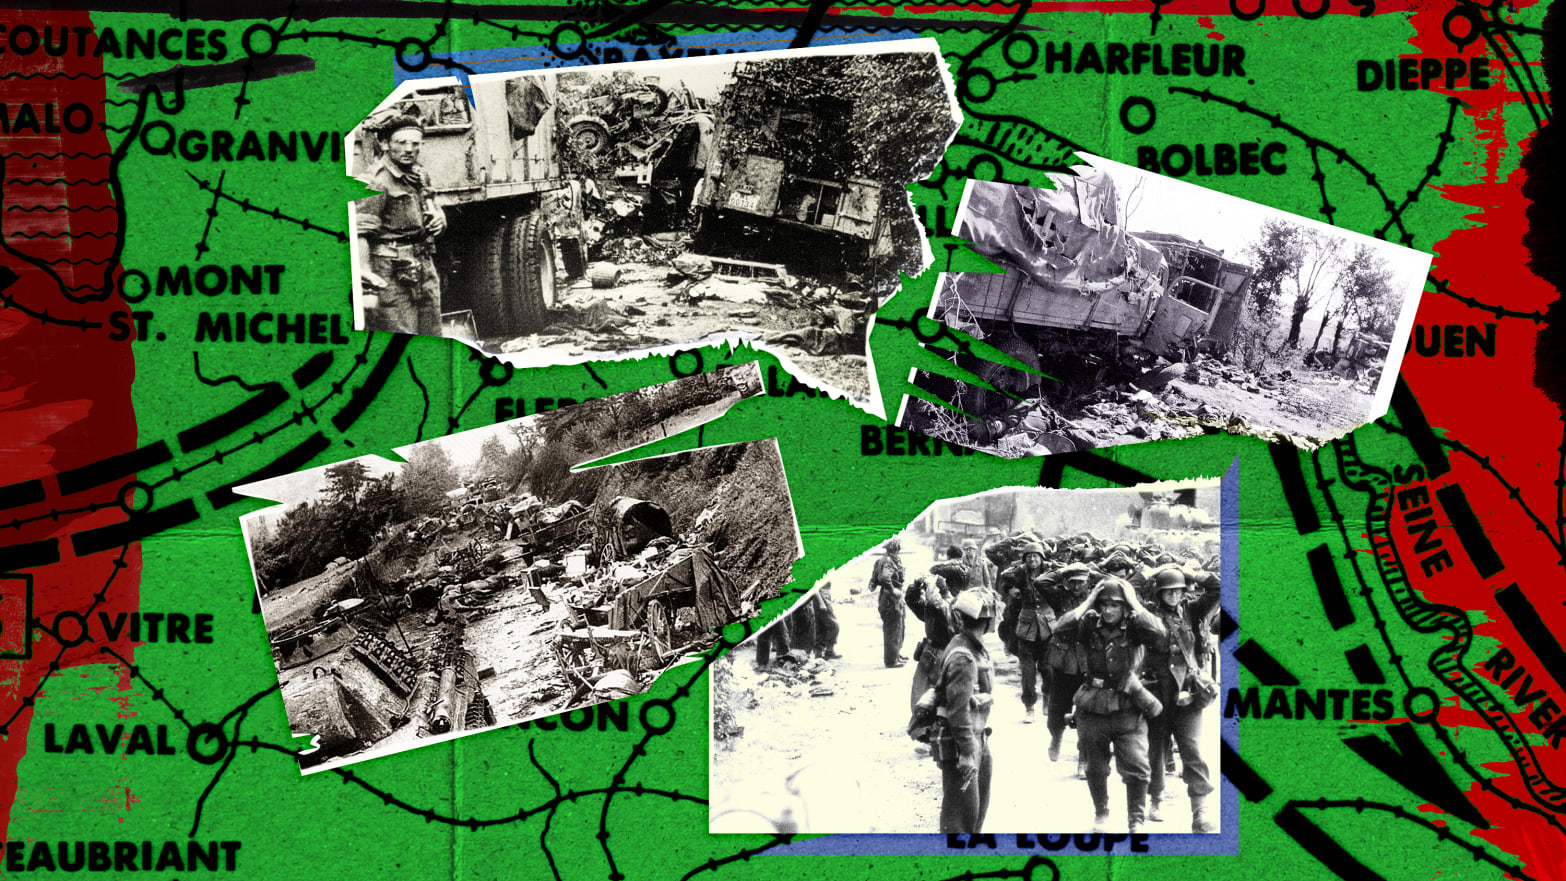 A photo illustration of images and a map from the invasion of Normandy and battles from the Couloir de la Mort.